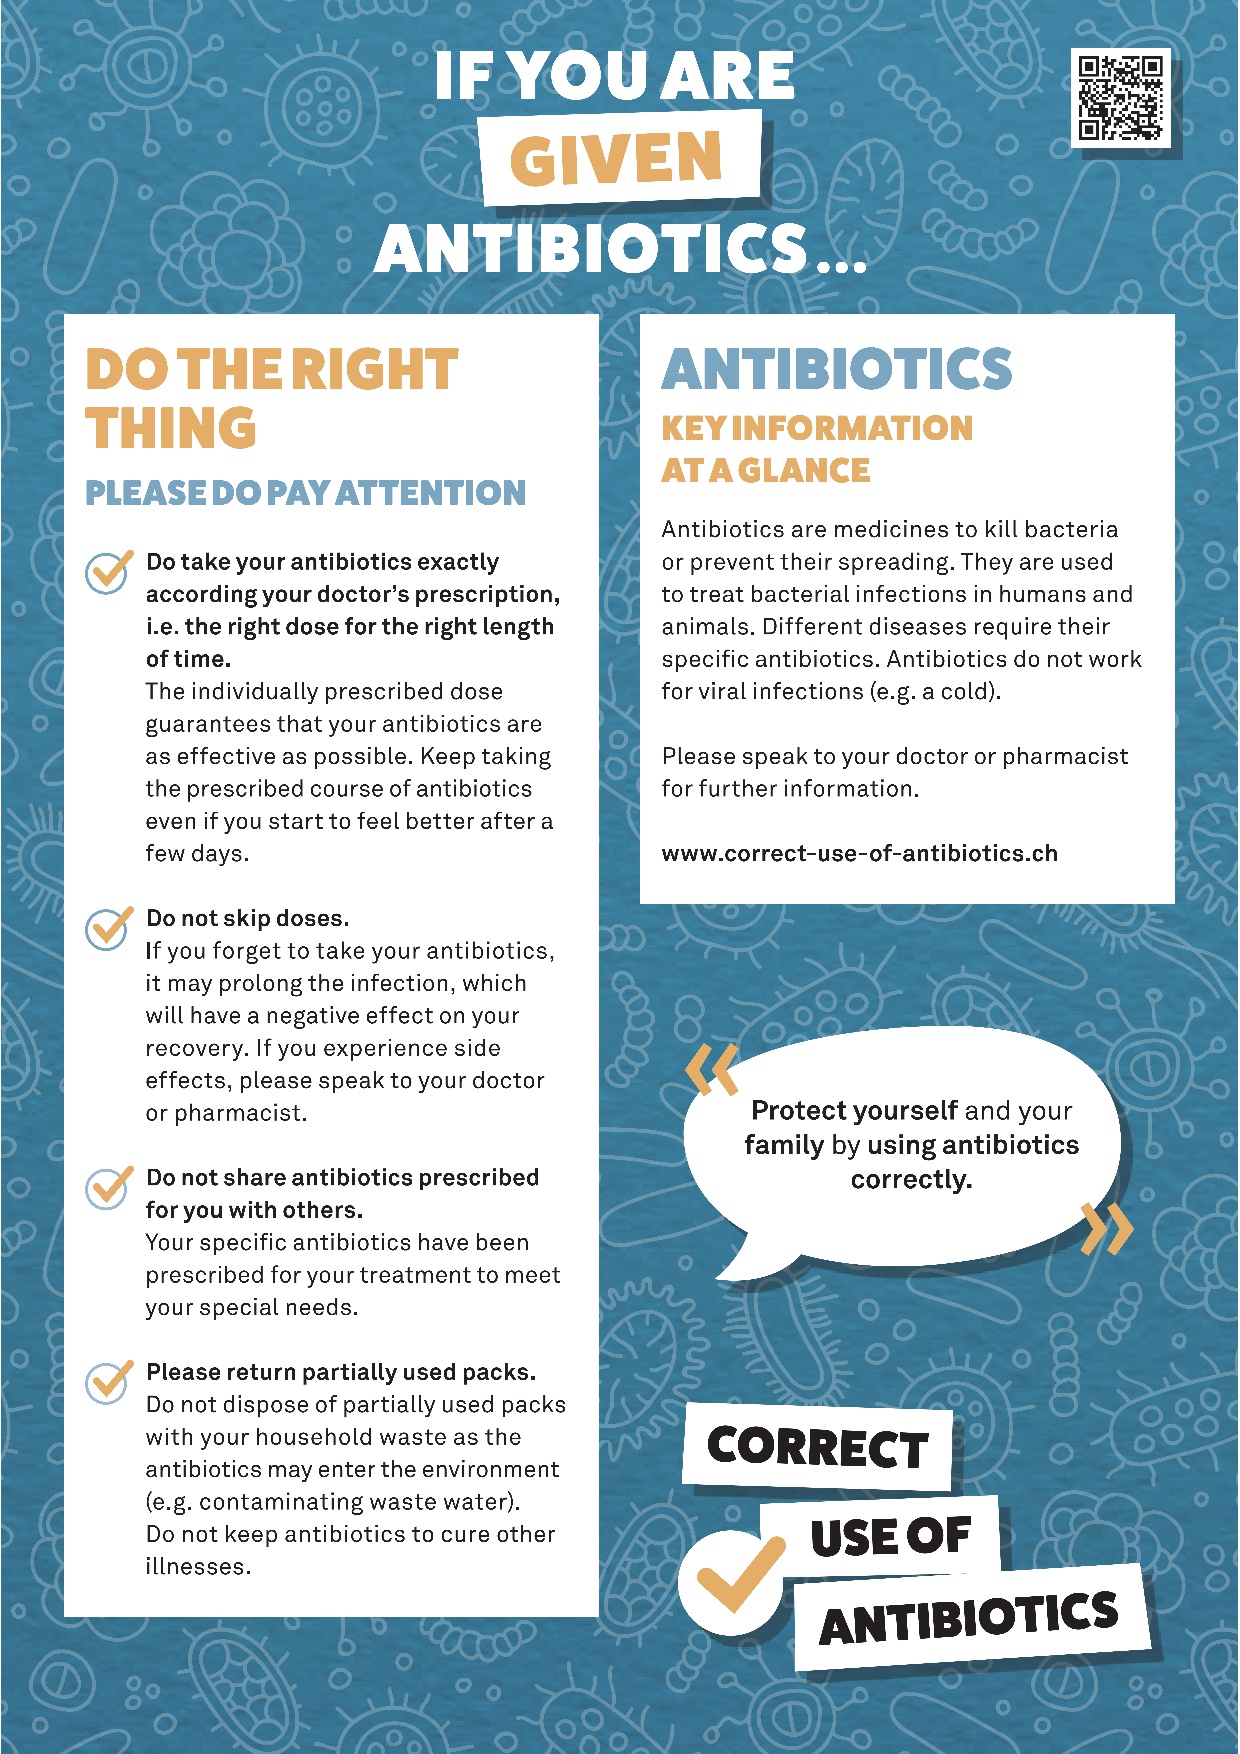 Antibiotic resistance fact sheet for patients